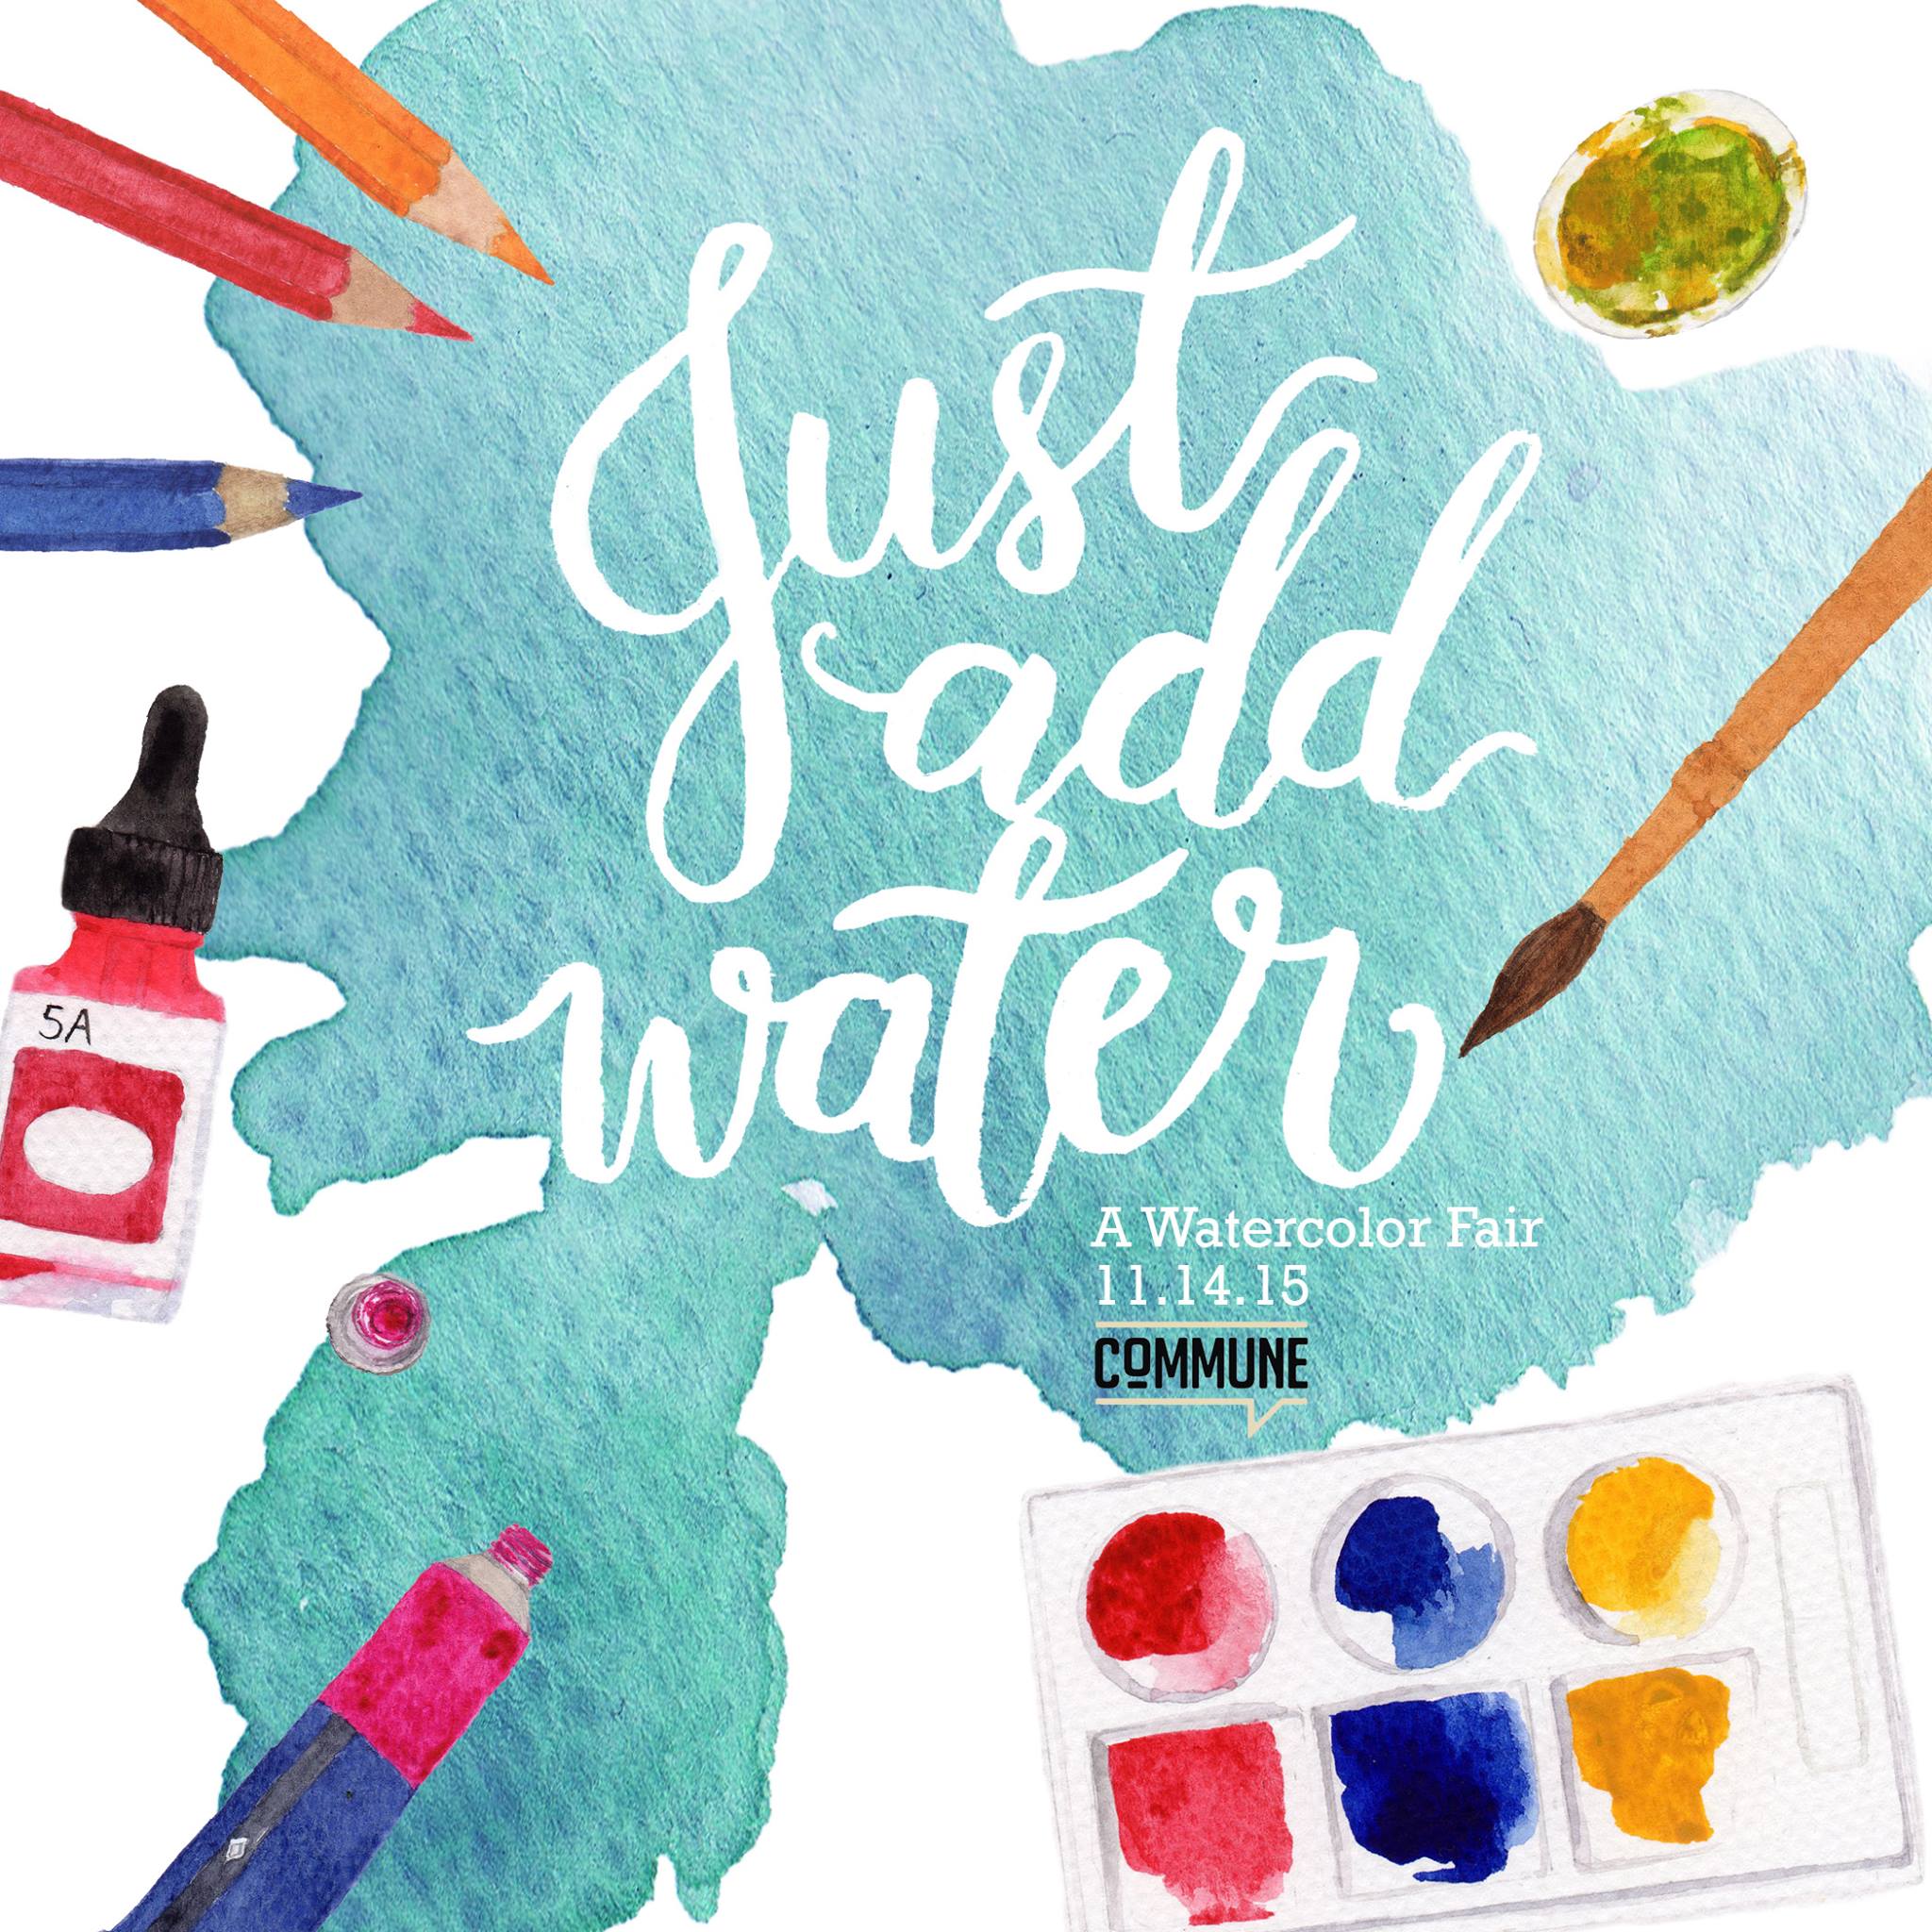 Just Add Water: A Watercolor Fair Saturday, November 14 at 10:00am - 6:00pm Show Map Commune 36 Polaris St., Poblacion, Makati, Philippines An event for watercolor enthusiasts! This event is free and is open for everyone. Amazing artists will come give a talk on their process as well as demonstrate their work. We're also doing art trades during the event, so be sure to bring some Artist Trading Cards!. We're also urging you to support Commune by buying from their menu. There will be also pop-up shops to satisfy your hoarder needs. So save up, start doing your ATCs. and hope to see you there! ------ Official event poster made by Pearl Diano